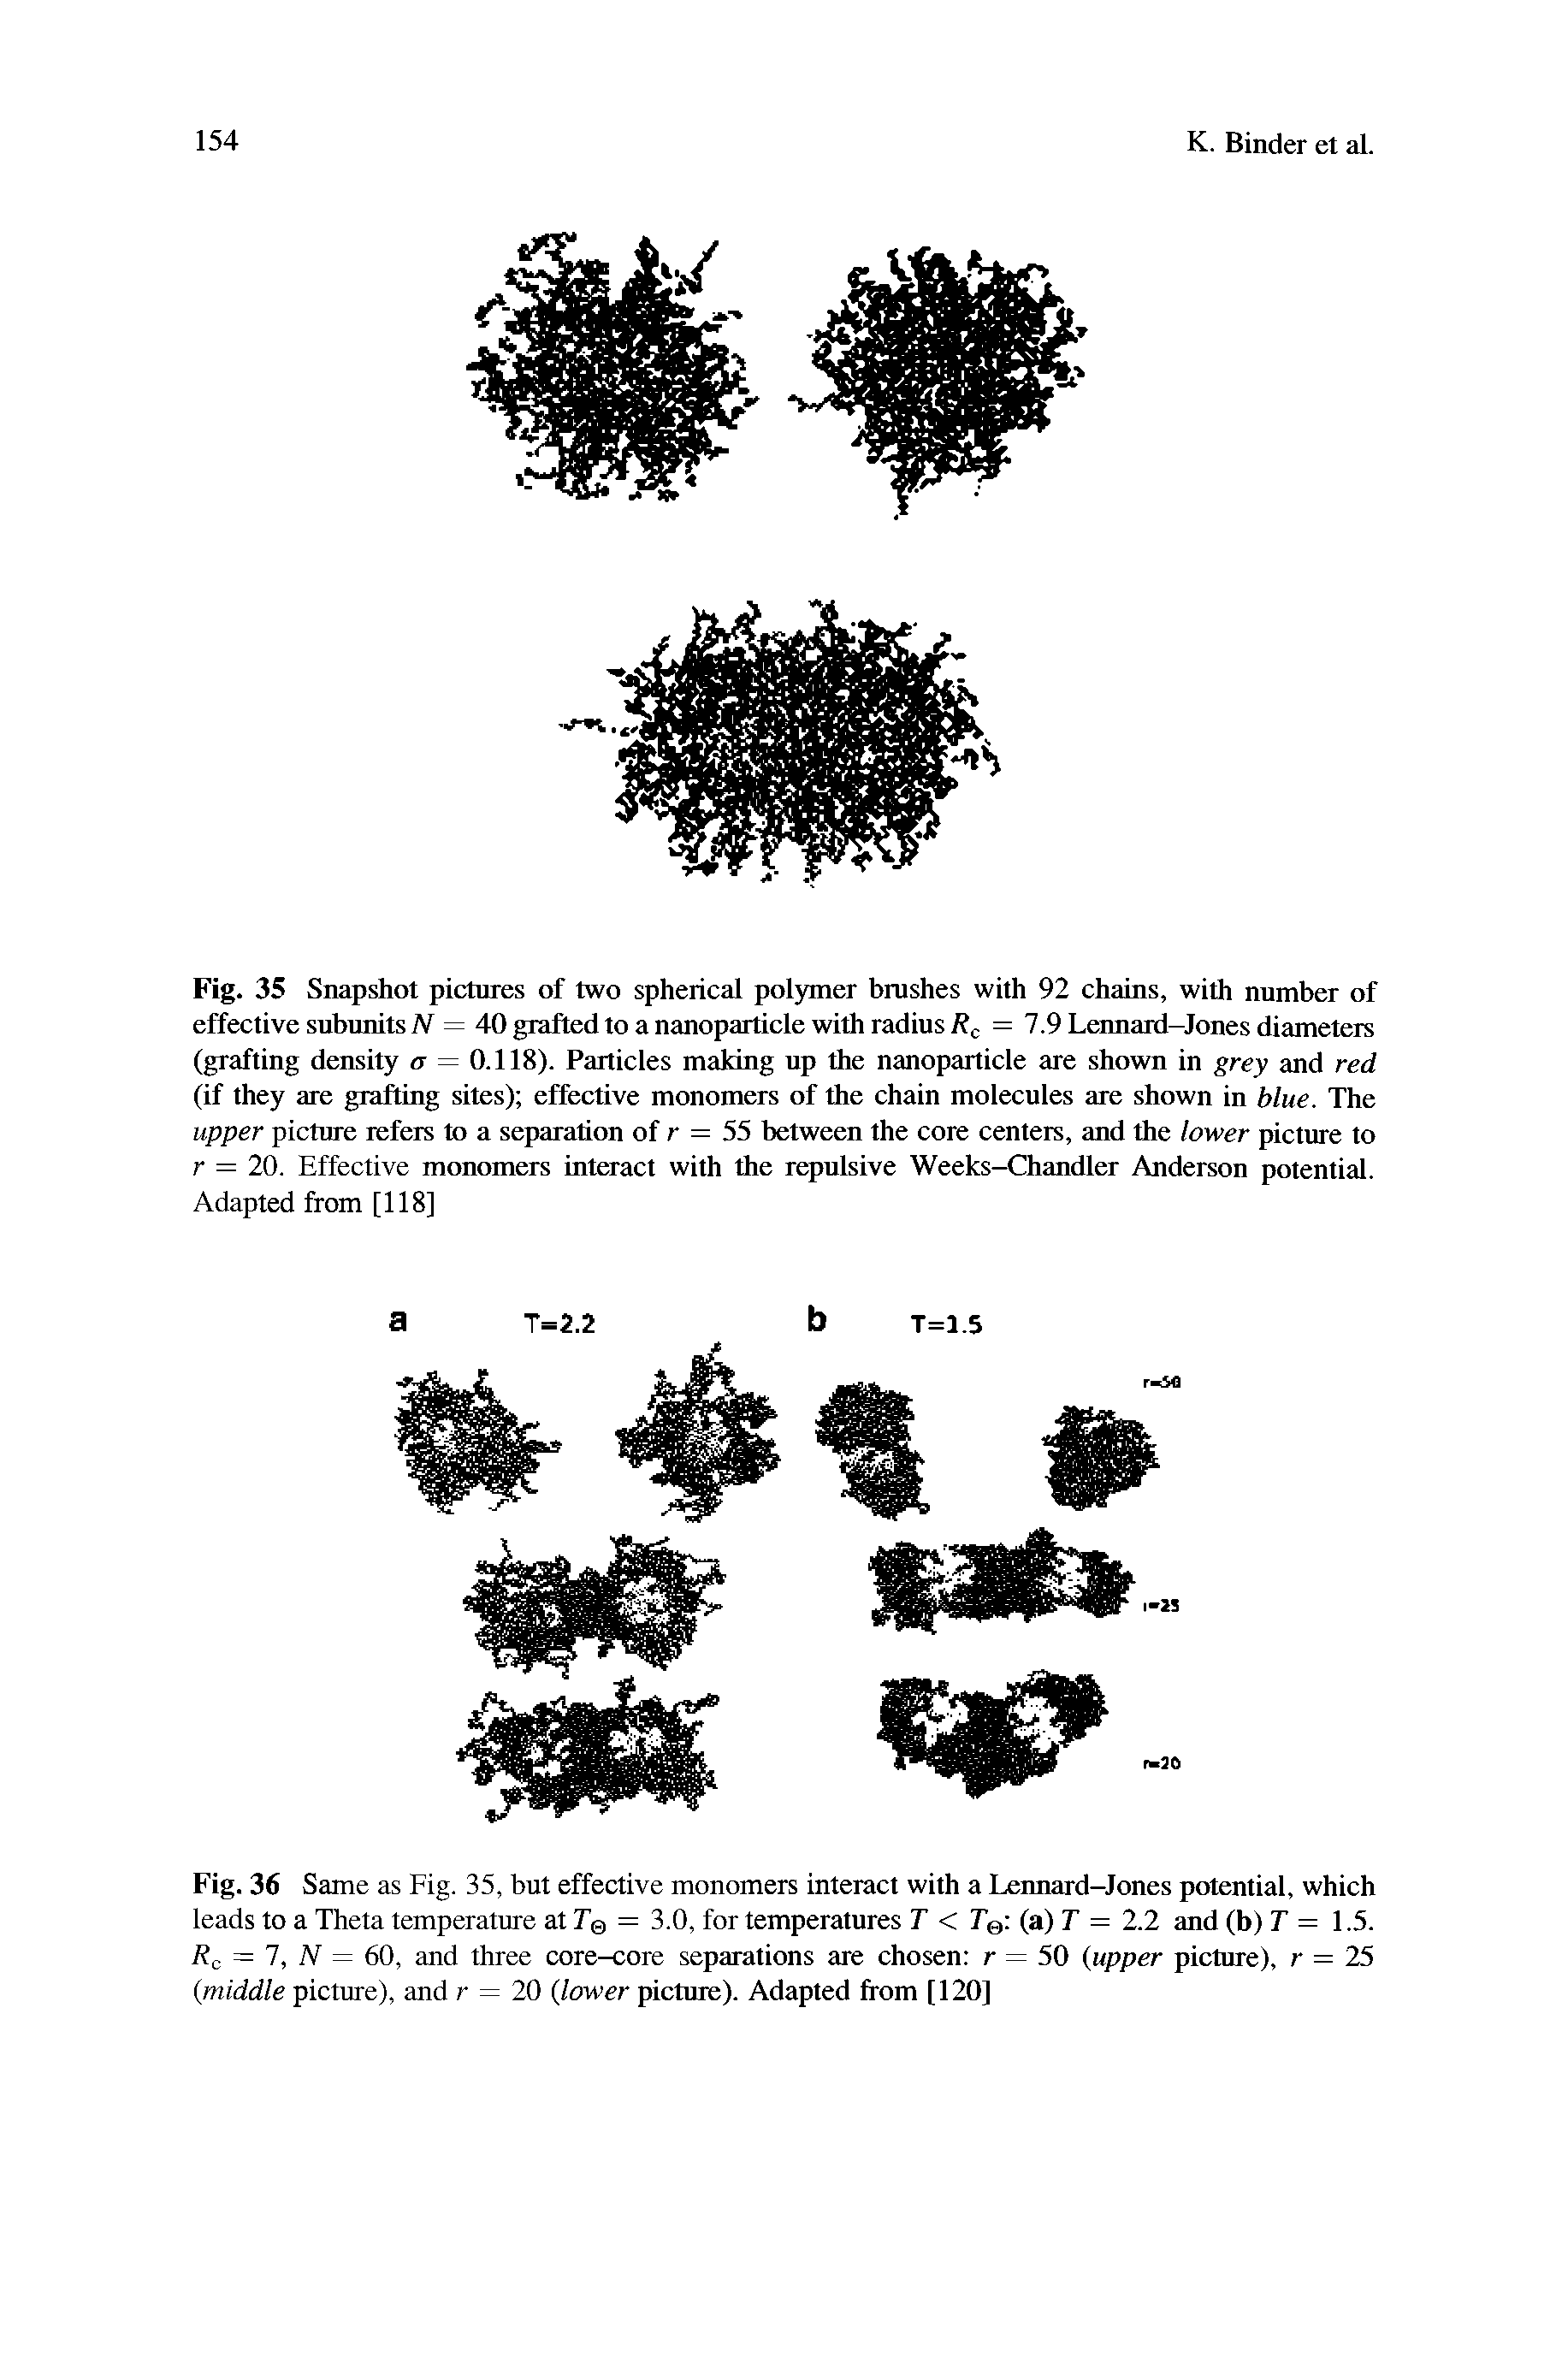 Fig. 35 Snapshot pictures of two spherical polymer brushes with 92 chains, with number of effective subunits N = 40 grafted to a nanoparticle with radius = 1.9 Lennard-Jones diameters...